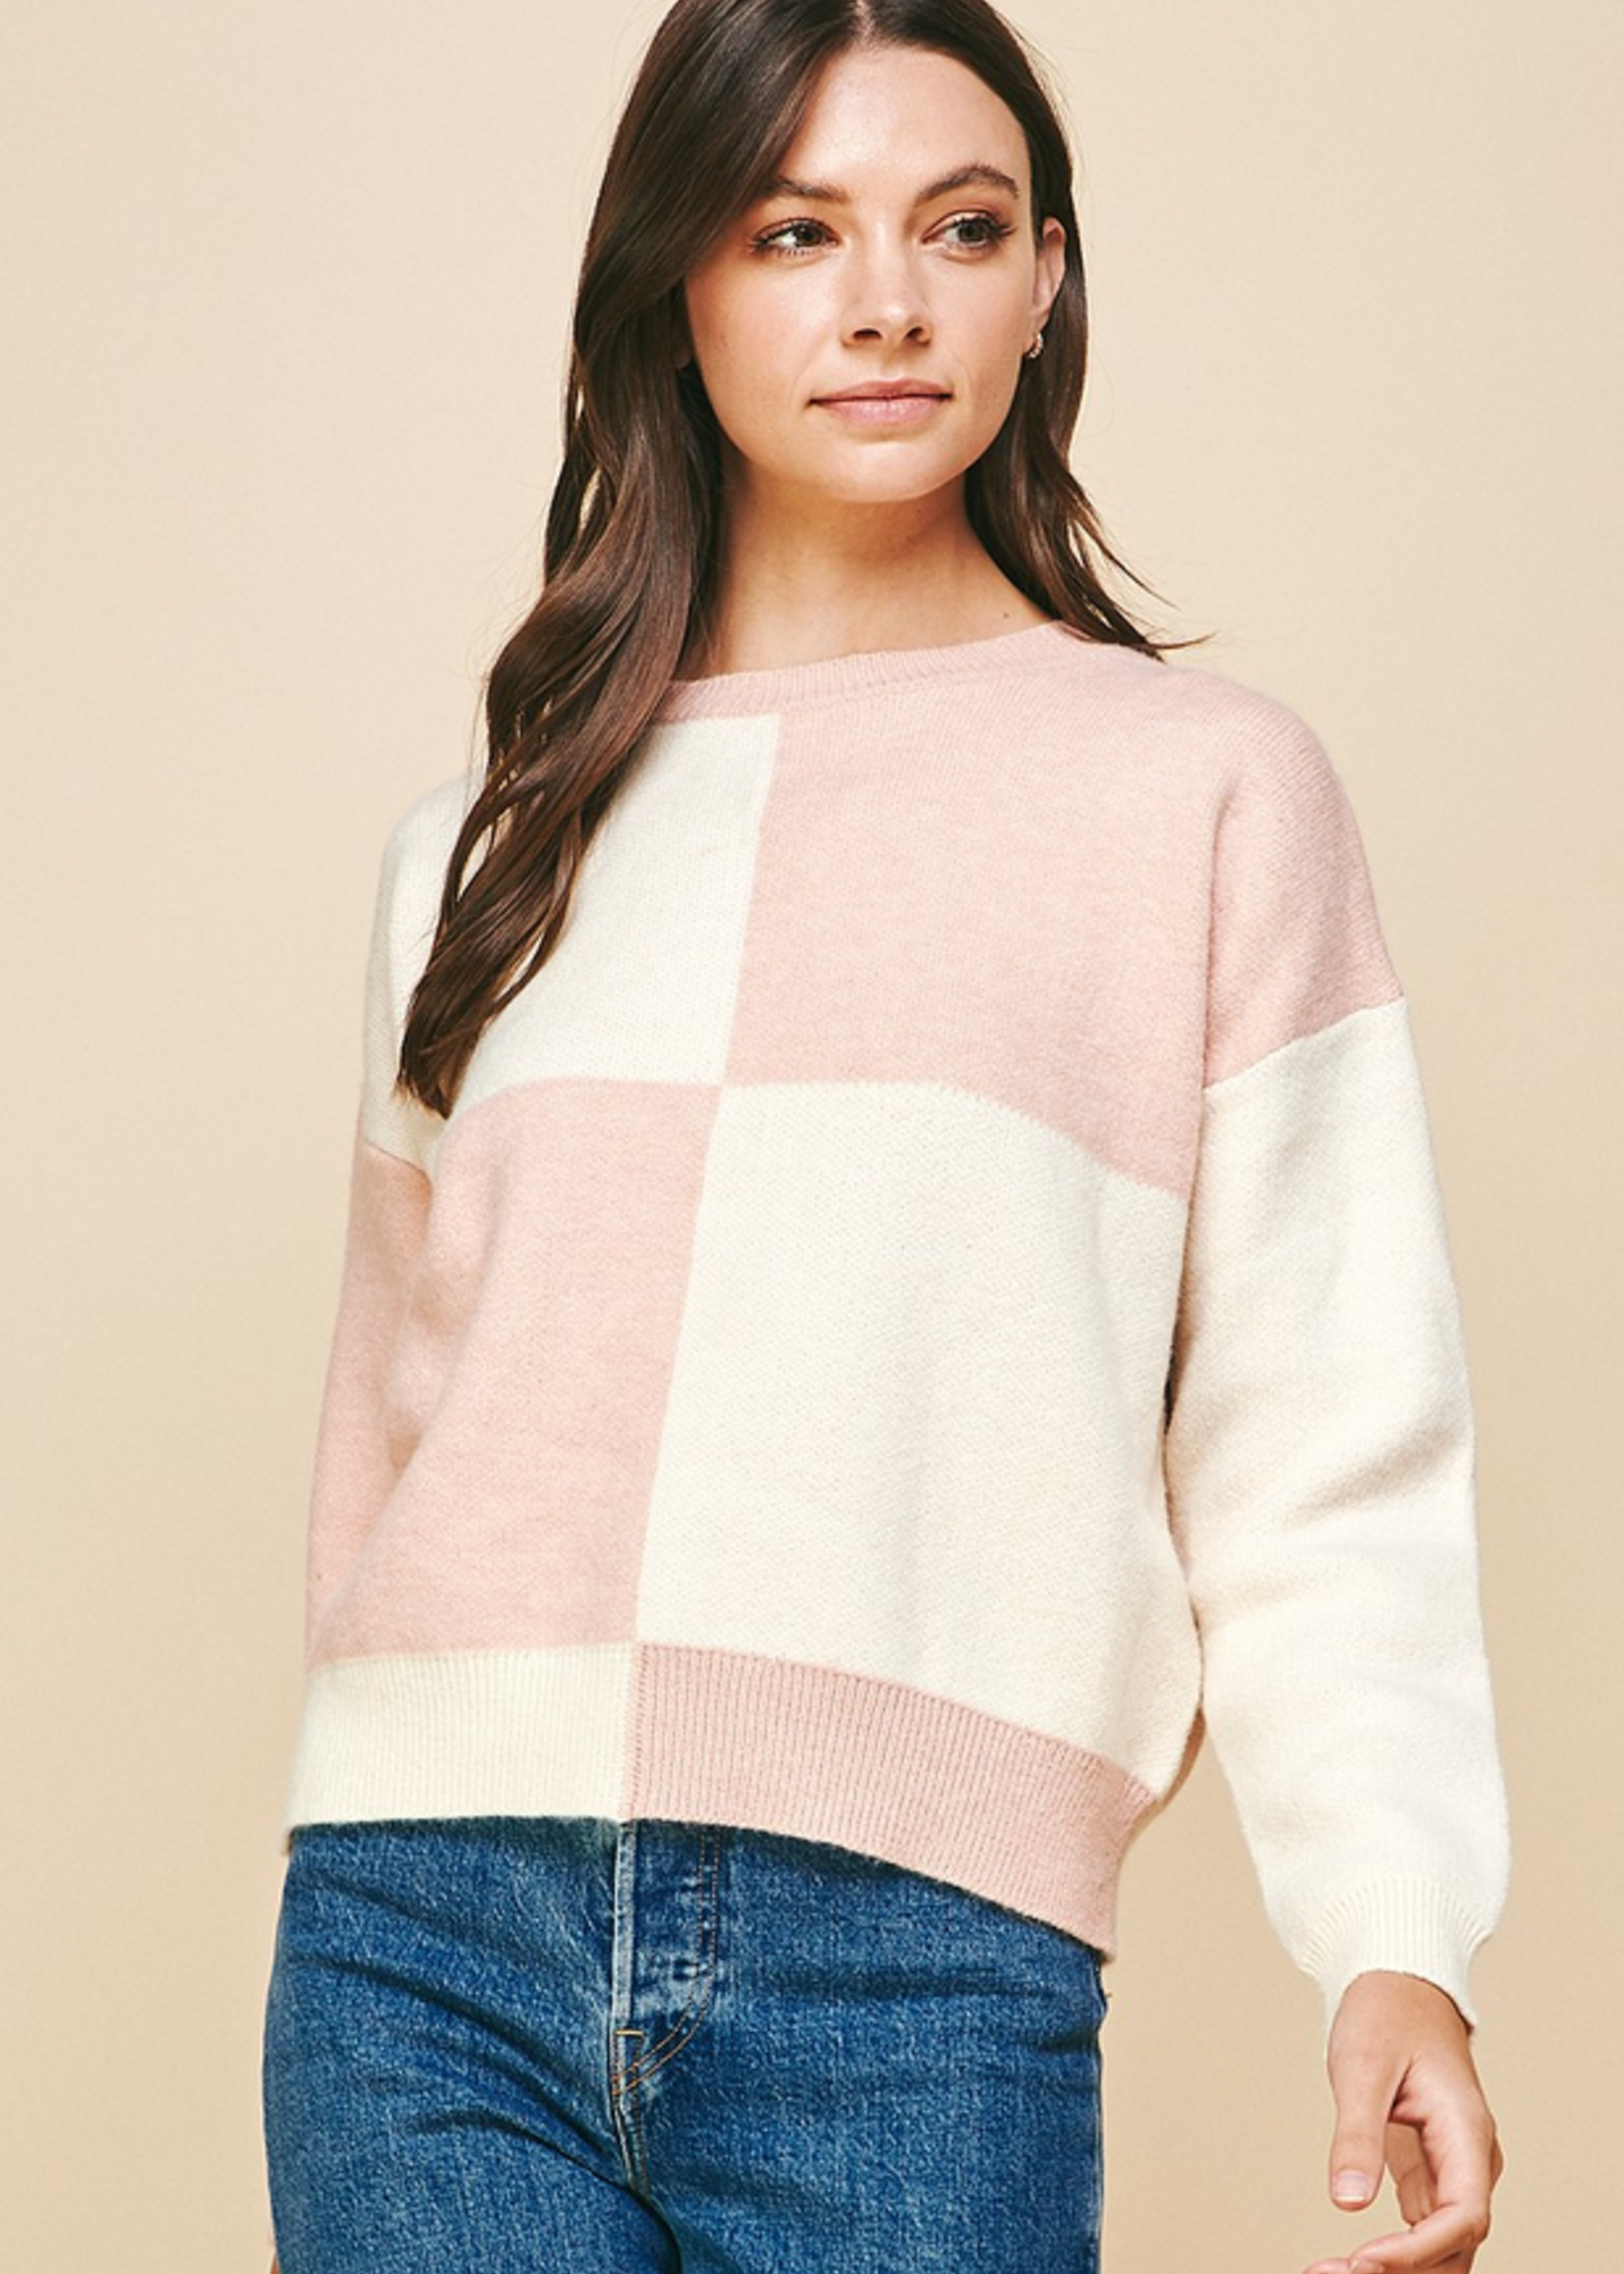 Colorblock Sweater - Pink/Ivory